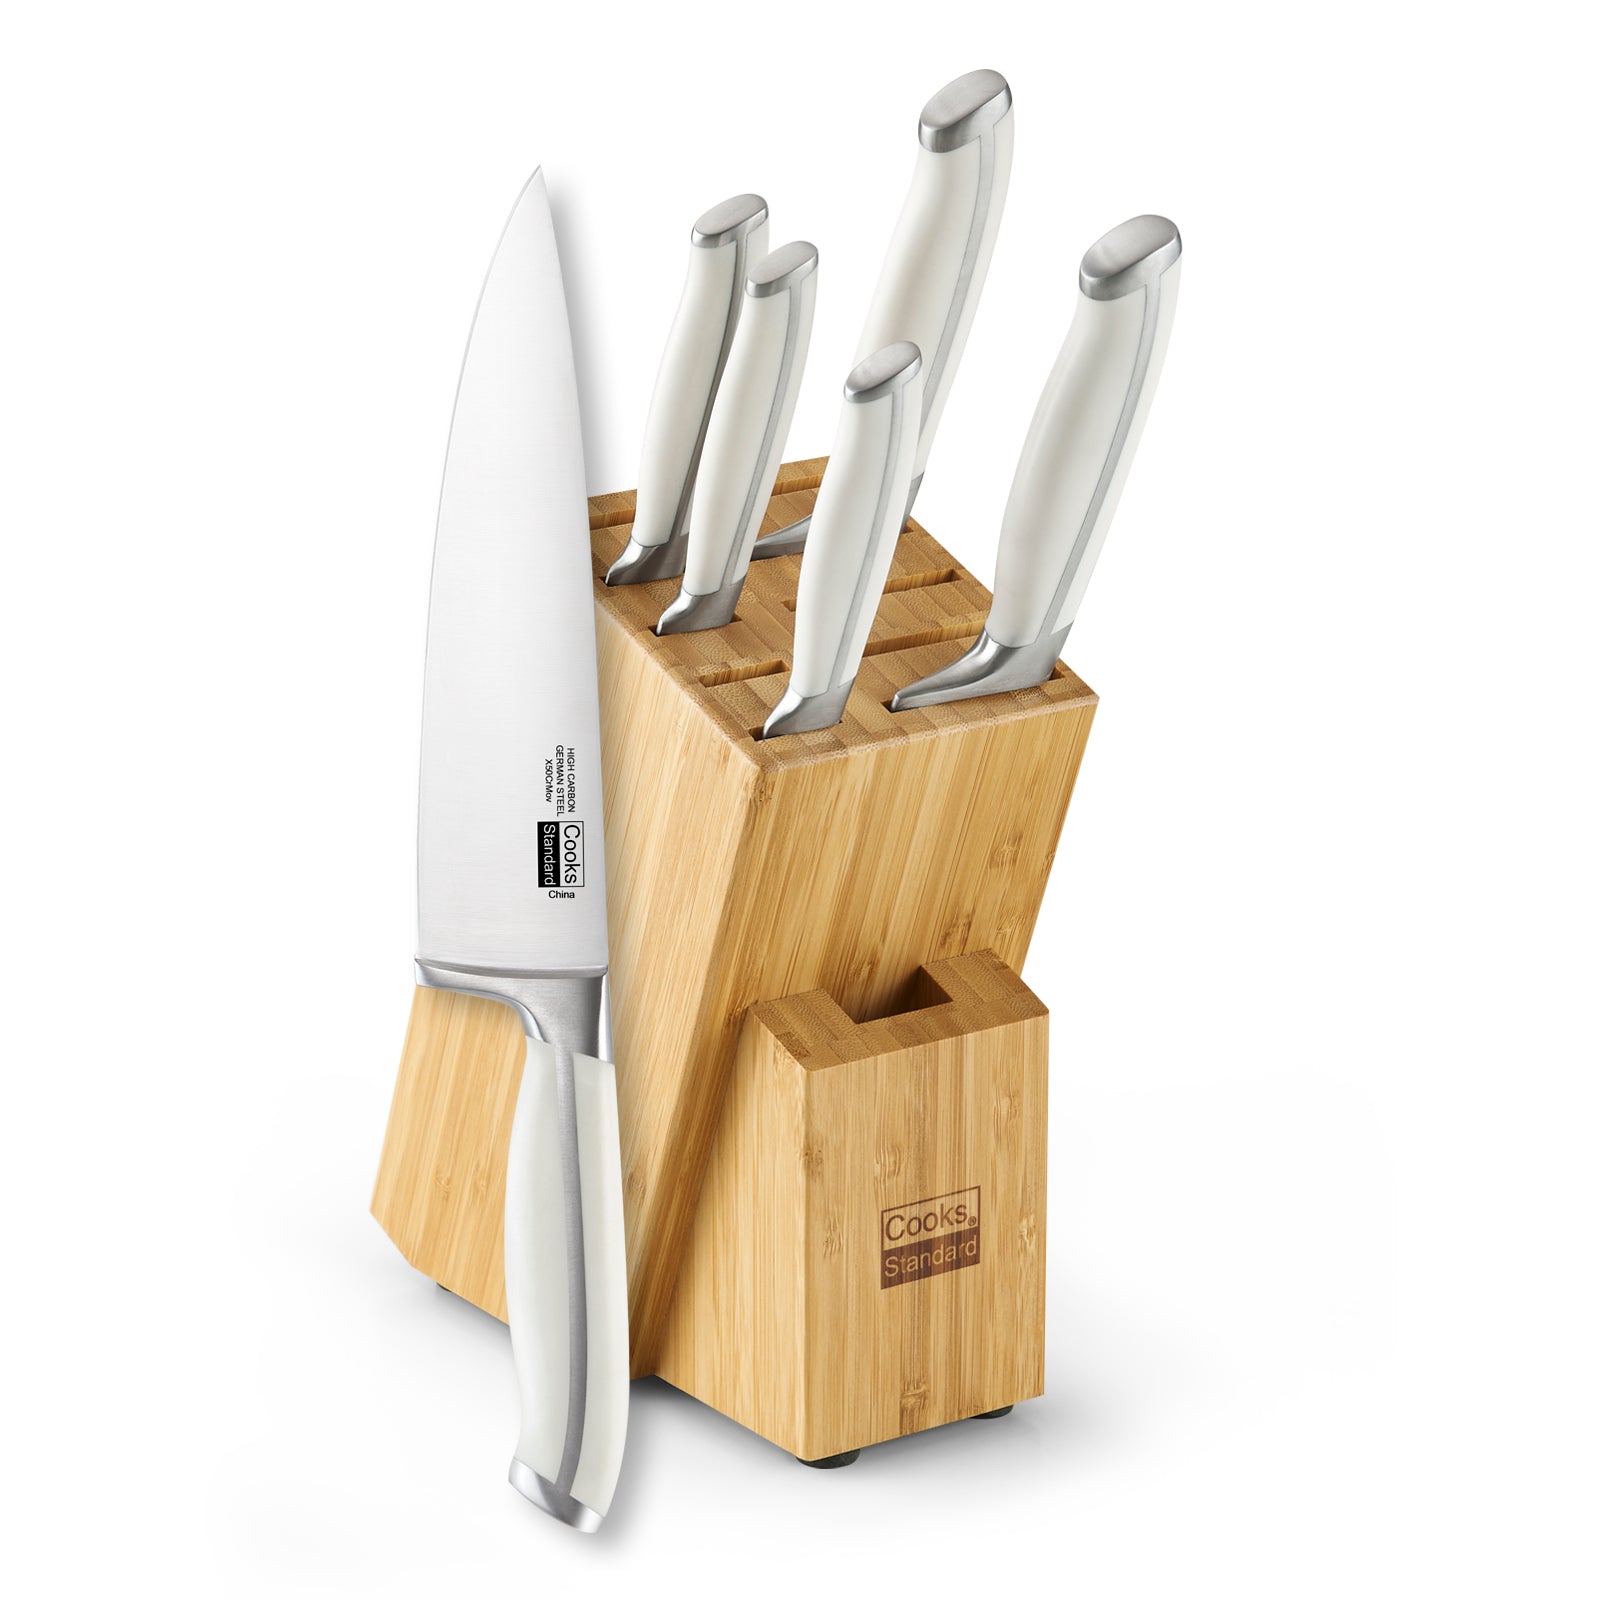 Cooks Standard Kitchen Knife Set with Block 6-Piece, Stainless Steel F